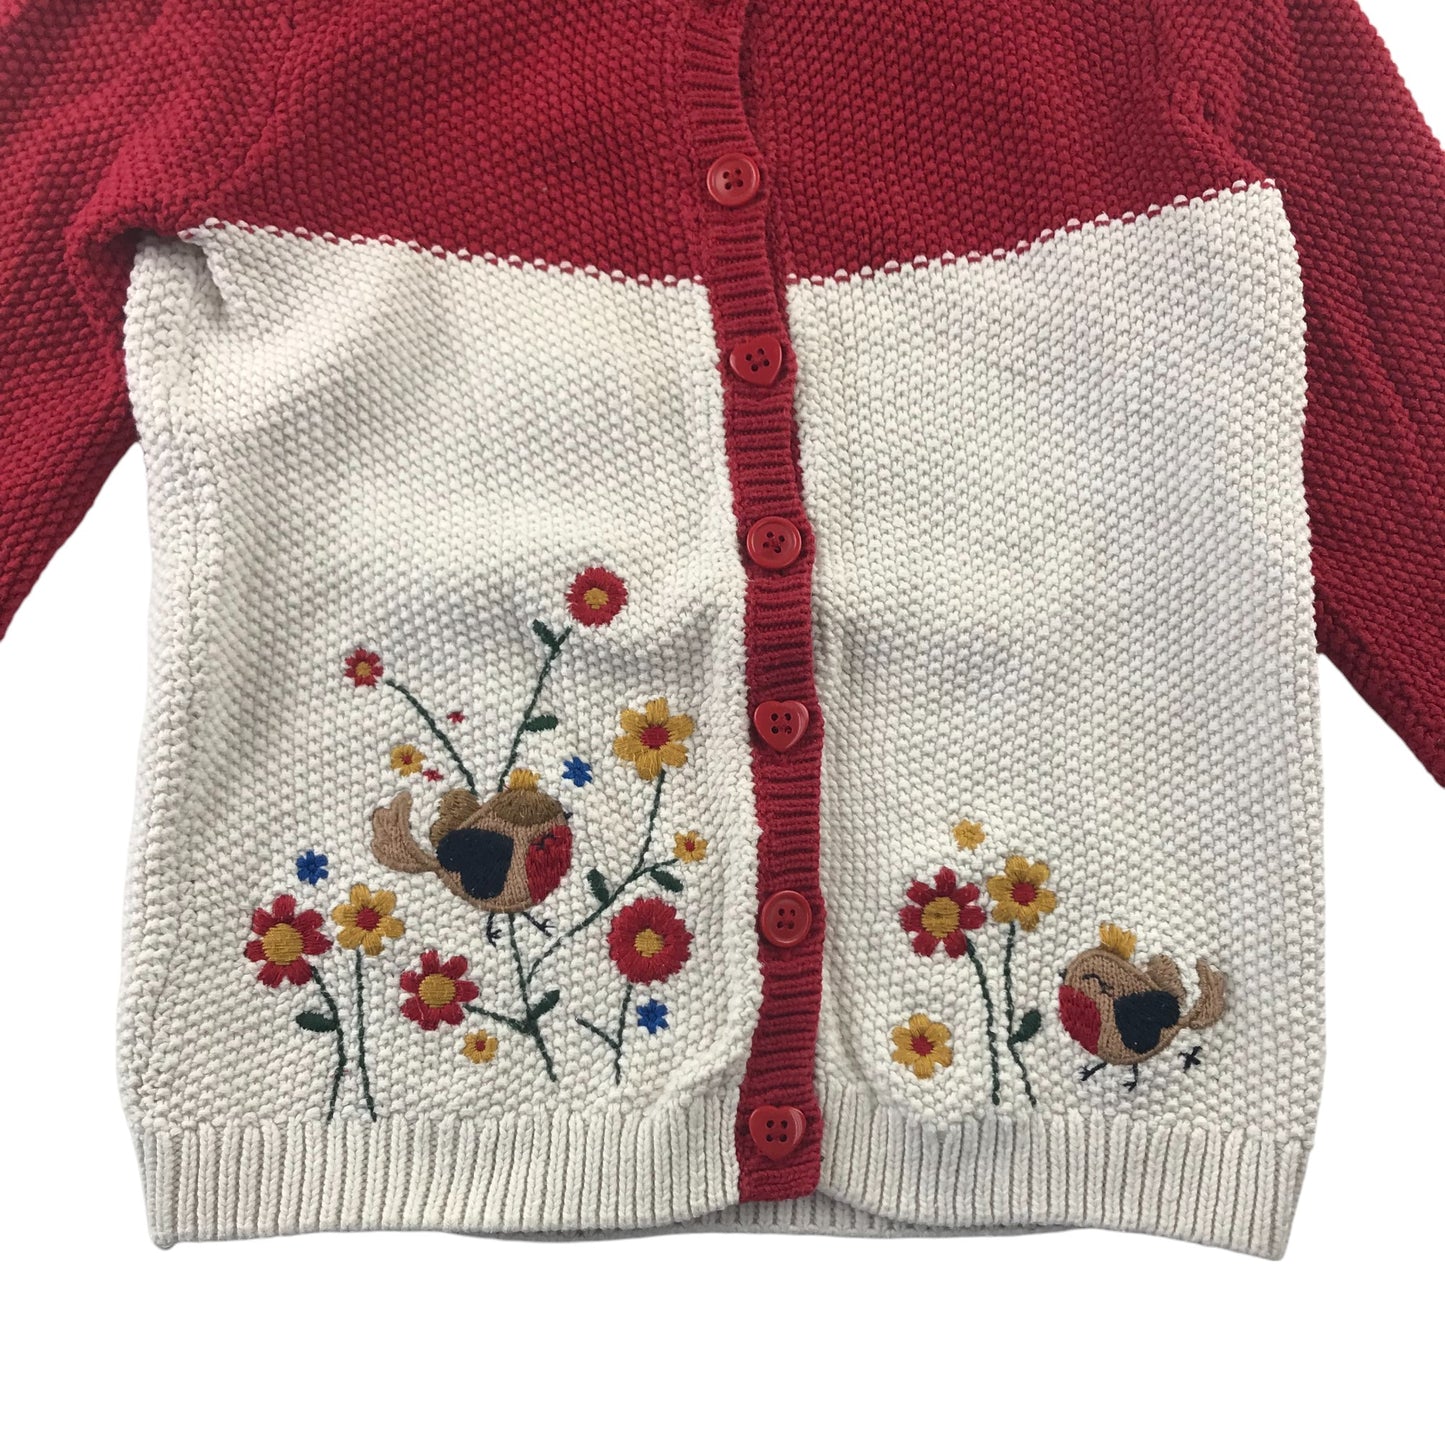 Tu cardigan 4-5 years red and white floral embroidered cotton